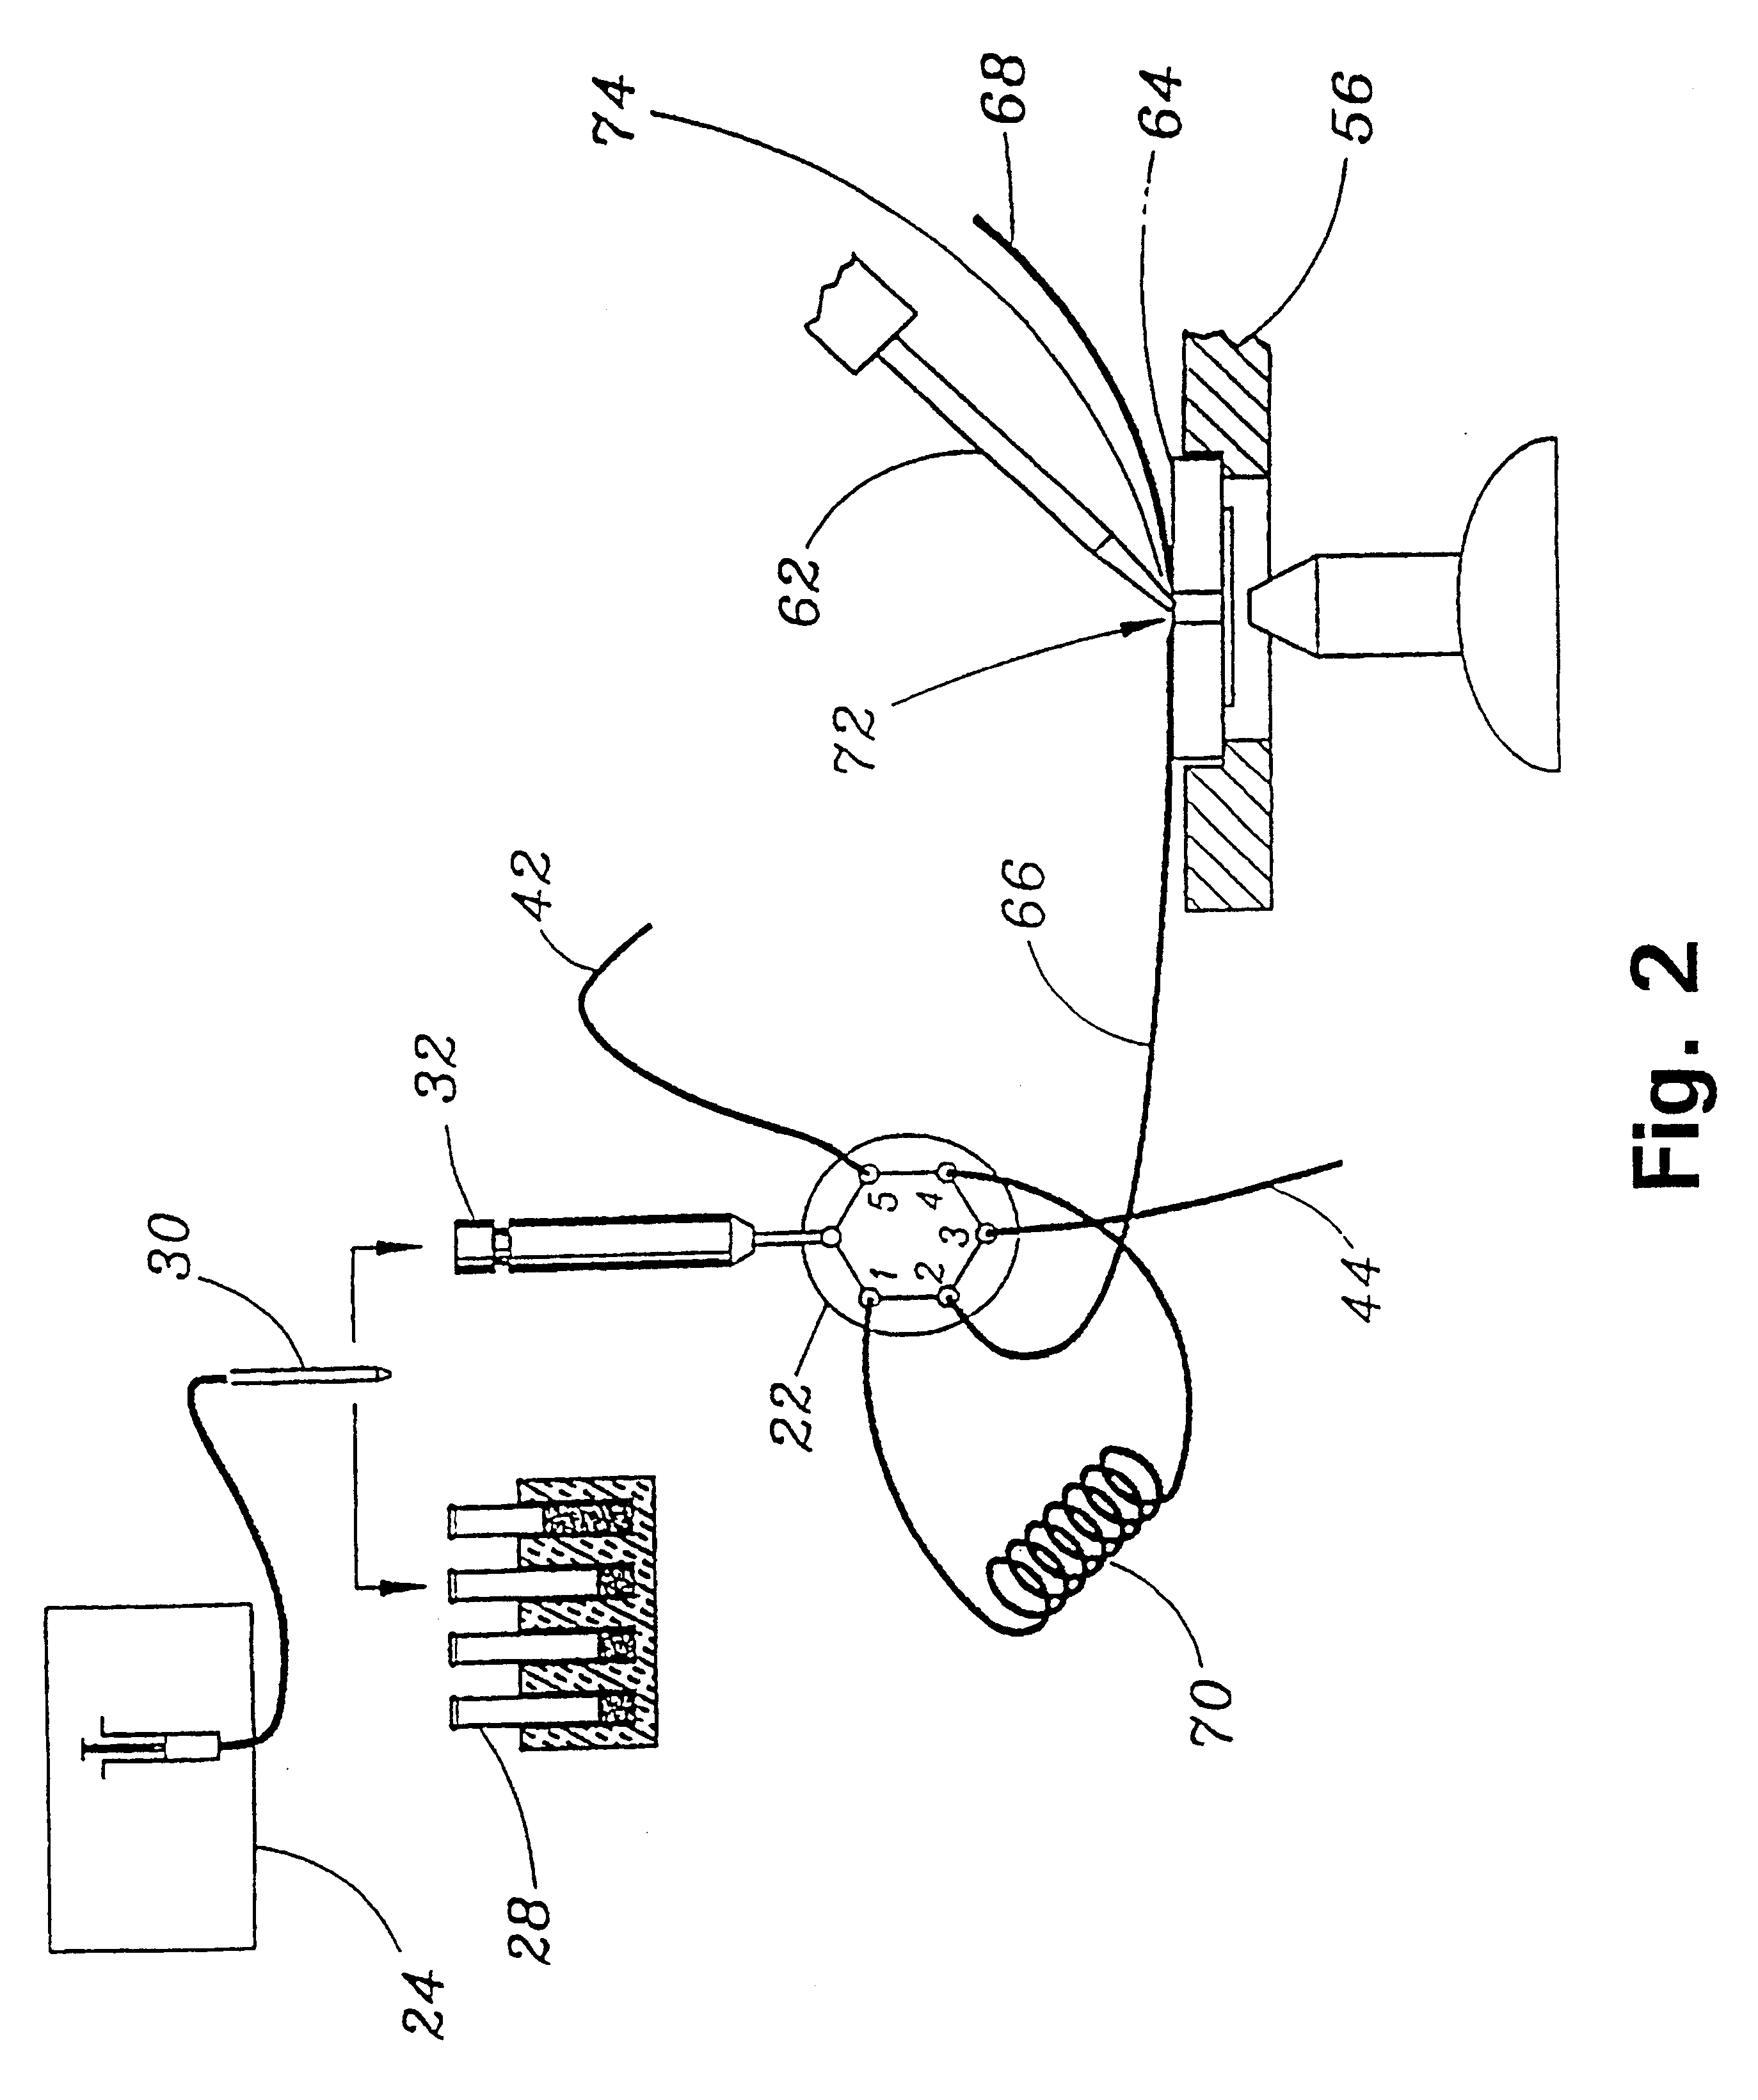 Automatic electrode positioning apparatus